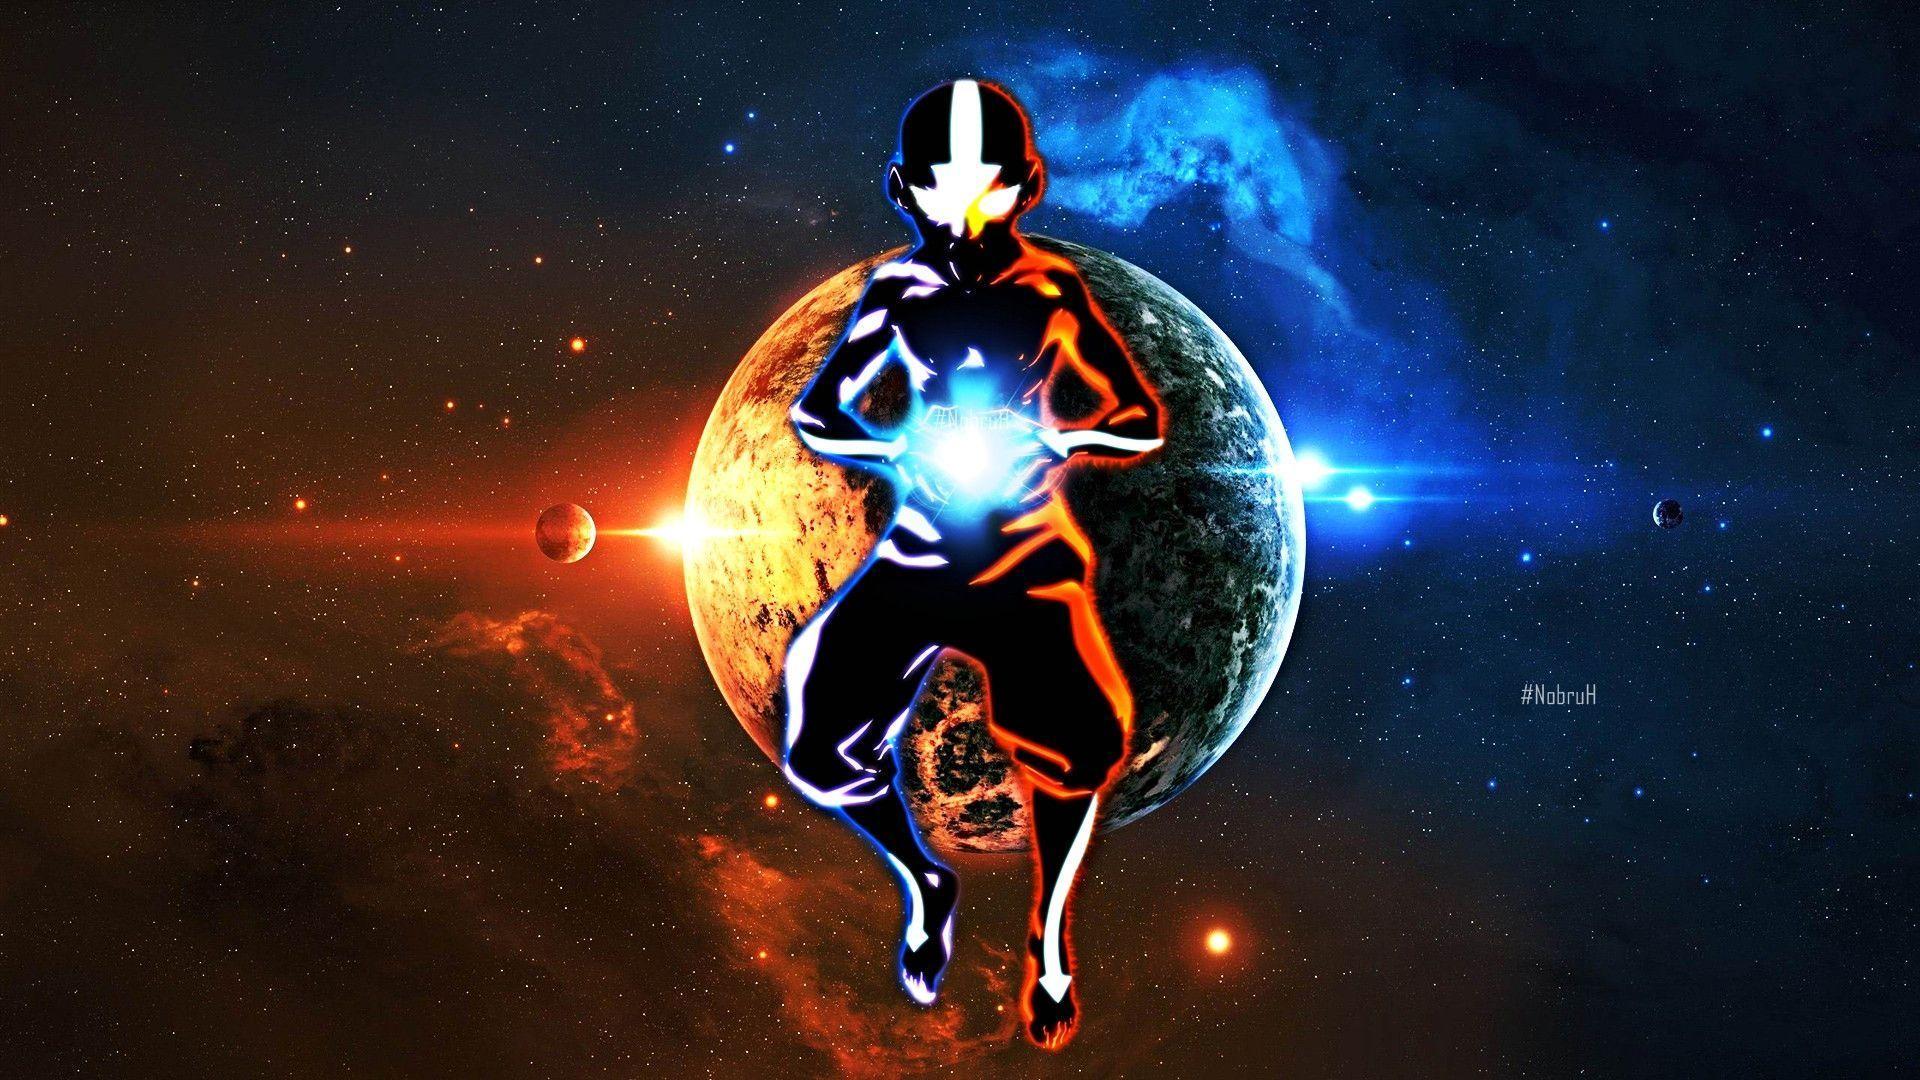 Image For > Avatar The Last Airbender Wallpapers Aang